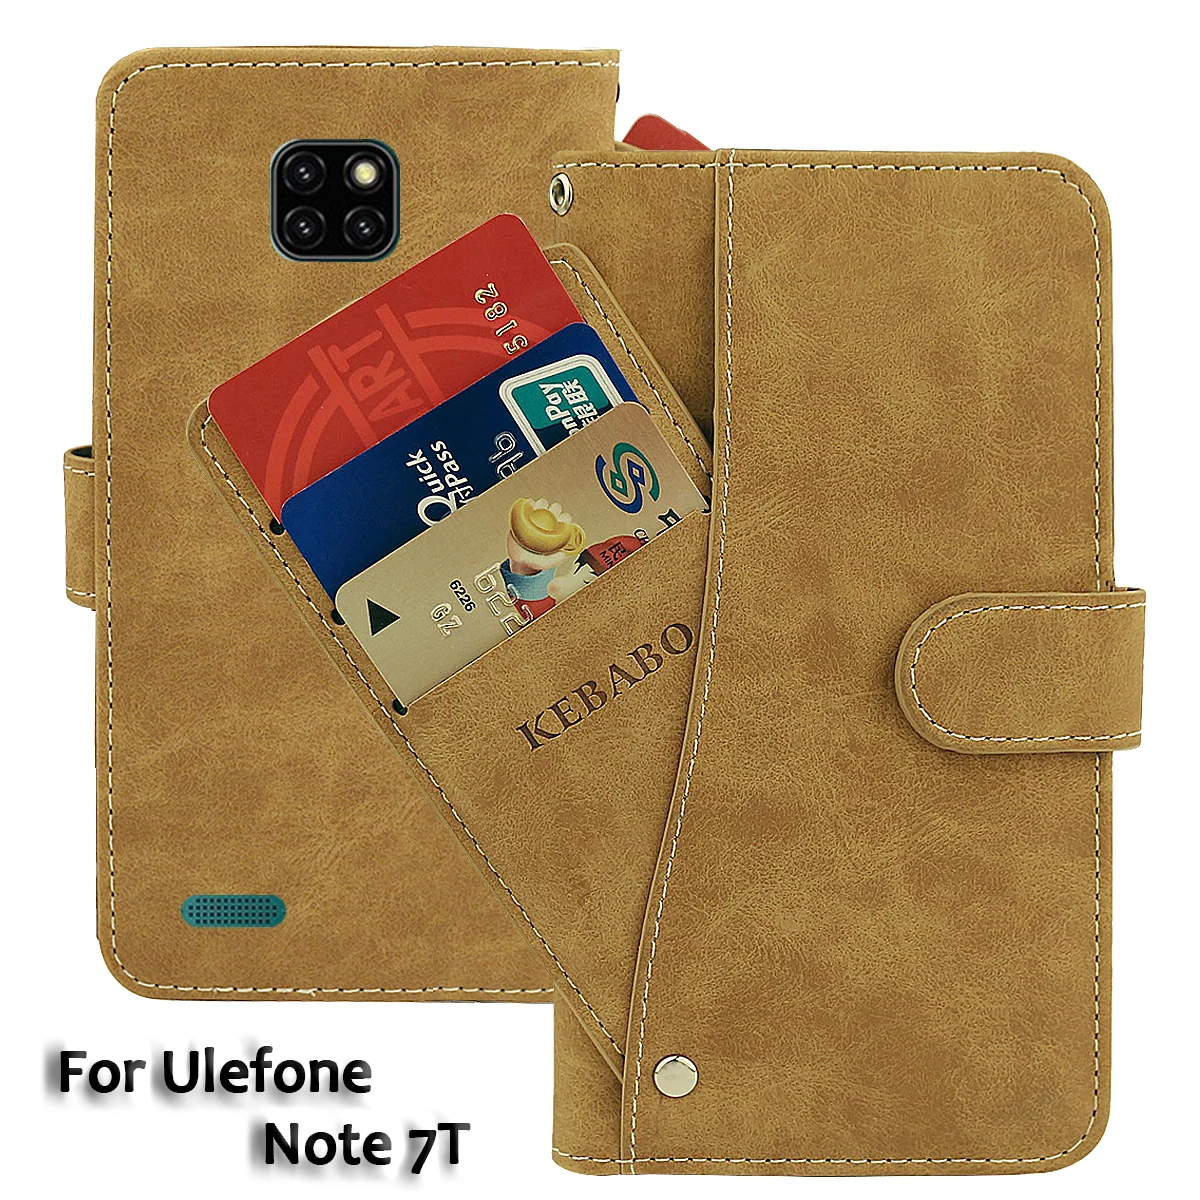 

Vintage Leather Wallet Ulefone Note 7T Case 6.1" Flip Luxury Card Slots Cover Magnet Phone Protective Cases Bags